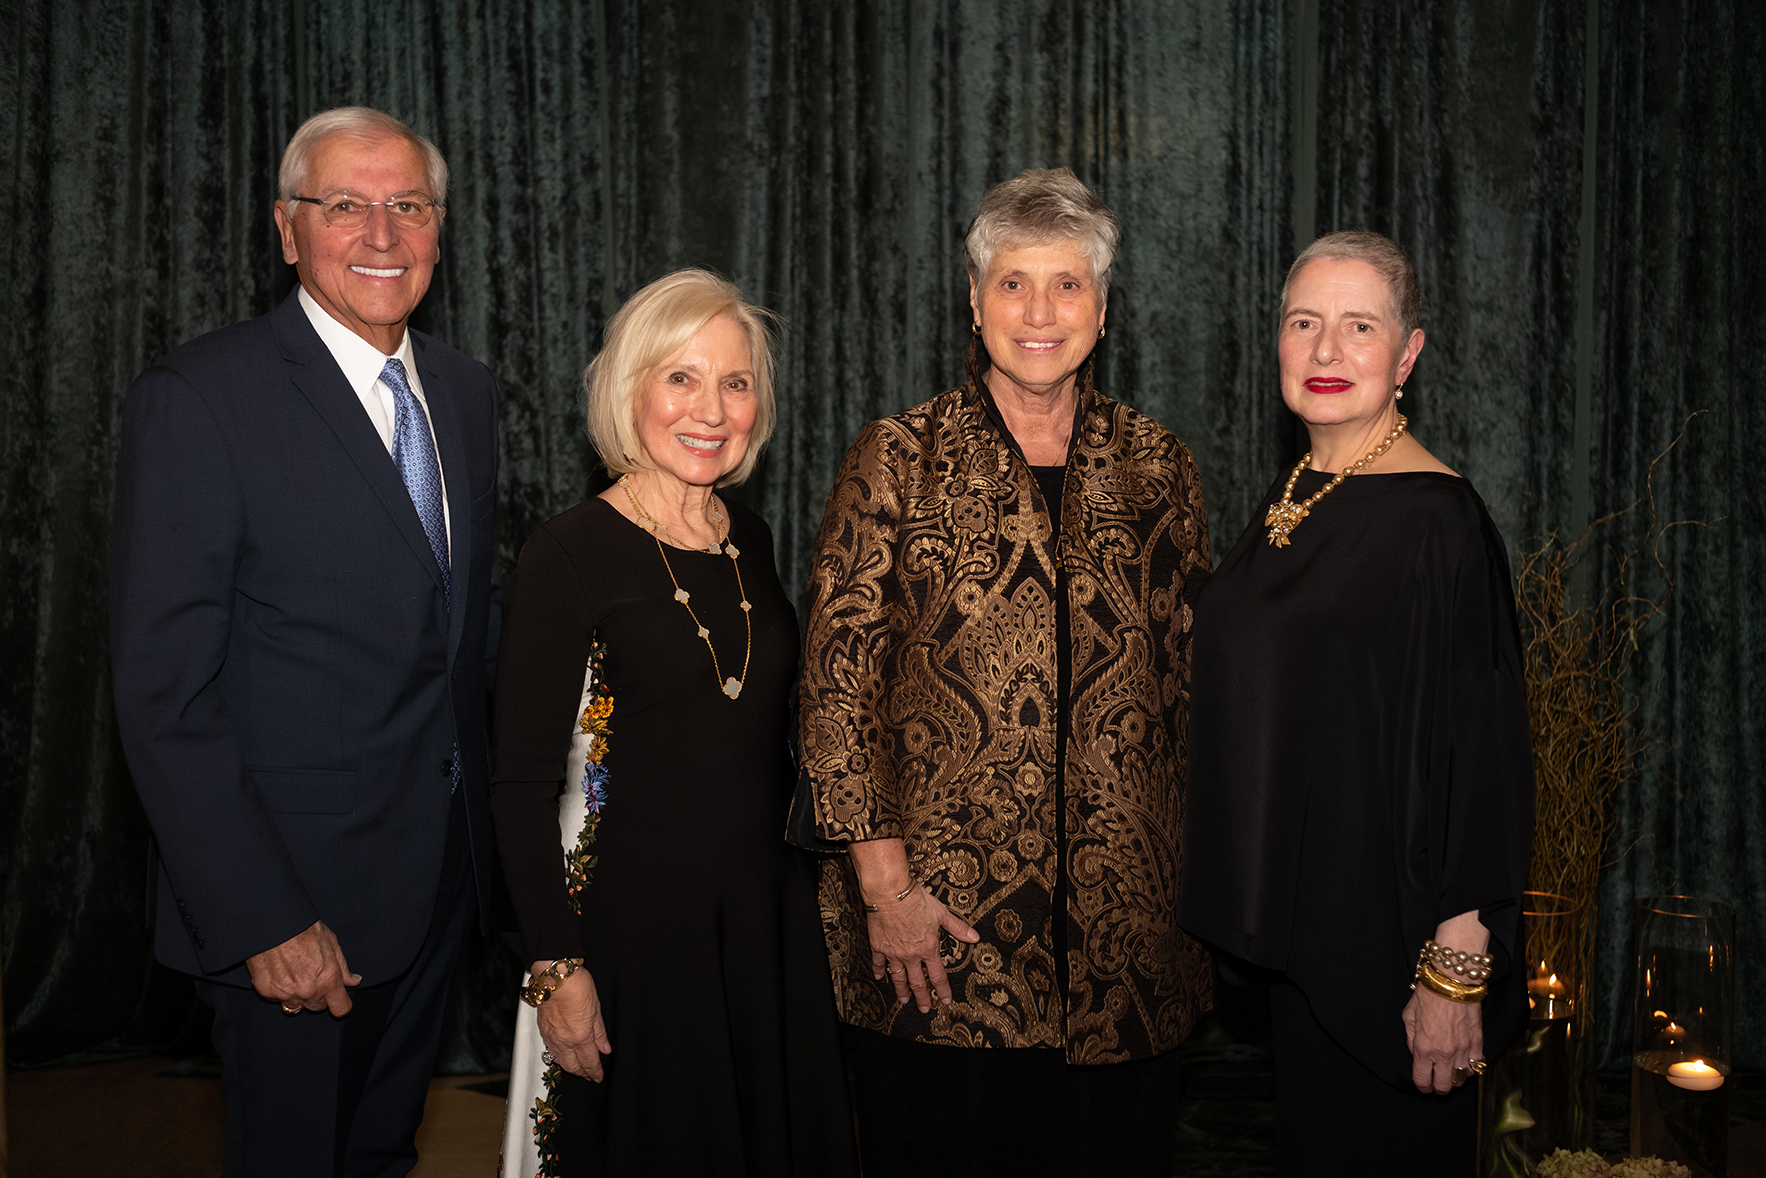 New members of the St. Alponsus Society at Marywood University are welcomed by Sister Mary Pesico, IHM.  Left to Right: Daniel and Kathleen Damico Mezzalingua ’60, Sister Mary Persico, IHM, Ed.D., and Pia Ferrario. Presidential Society Dinner Recognizes Major Benefactors